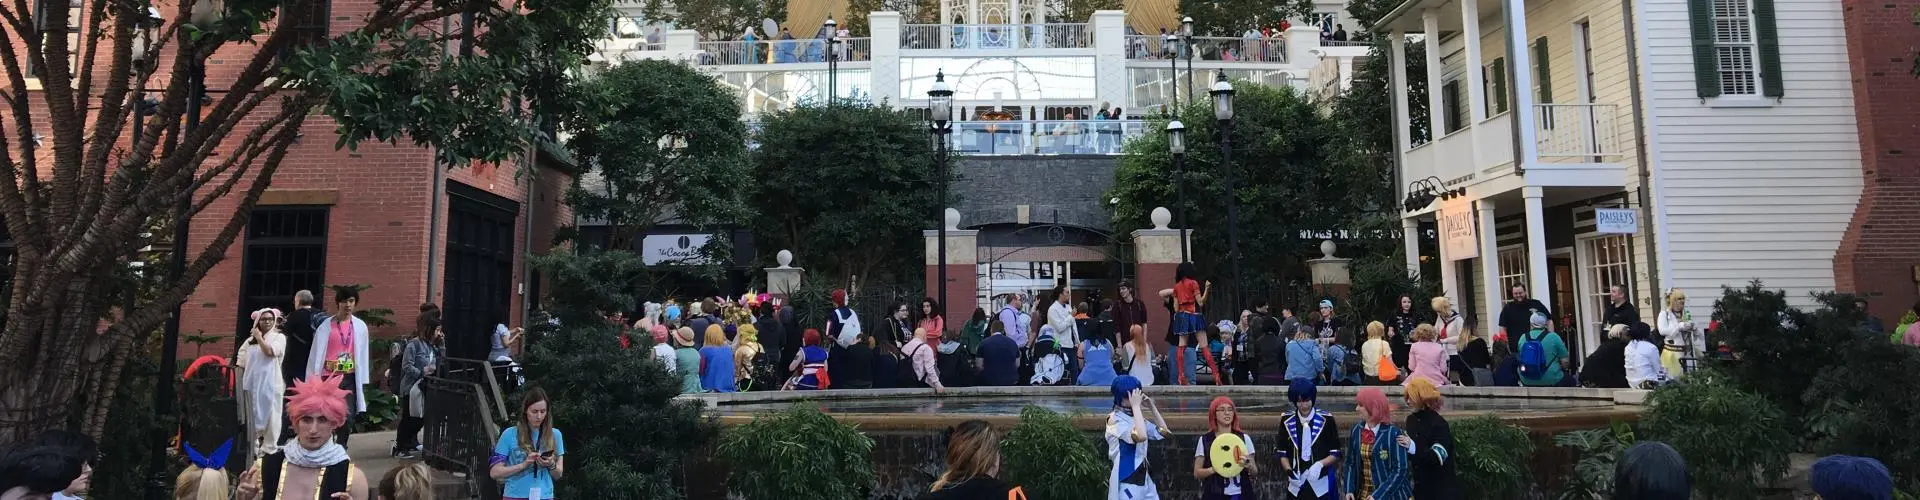 People cosplaying outside during a convention.